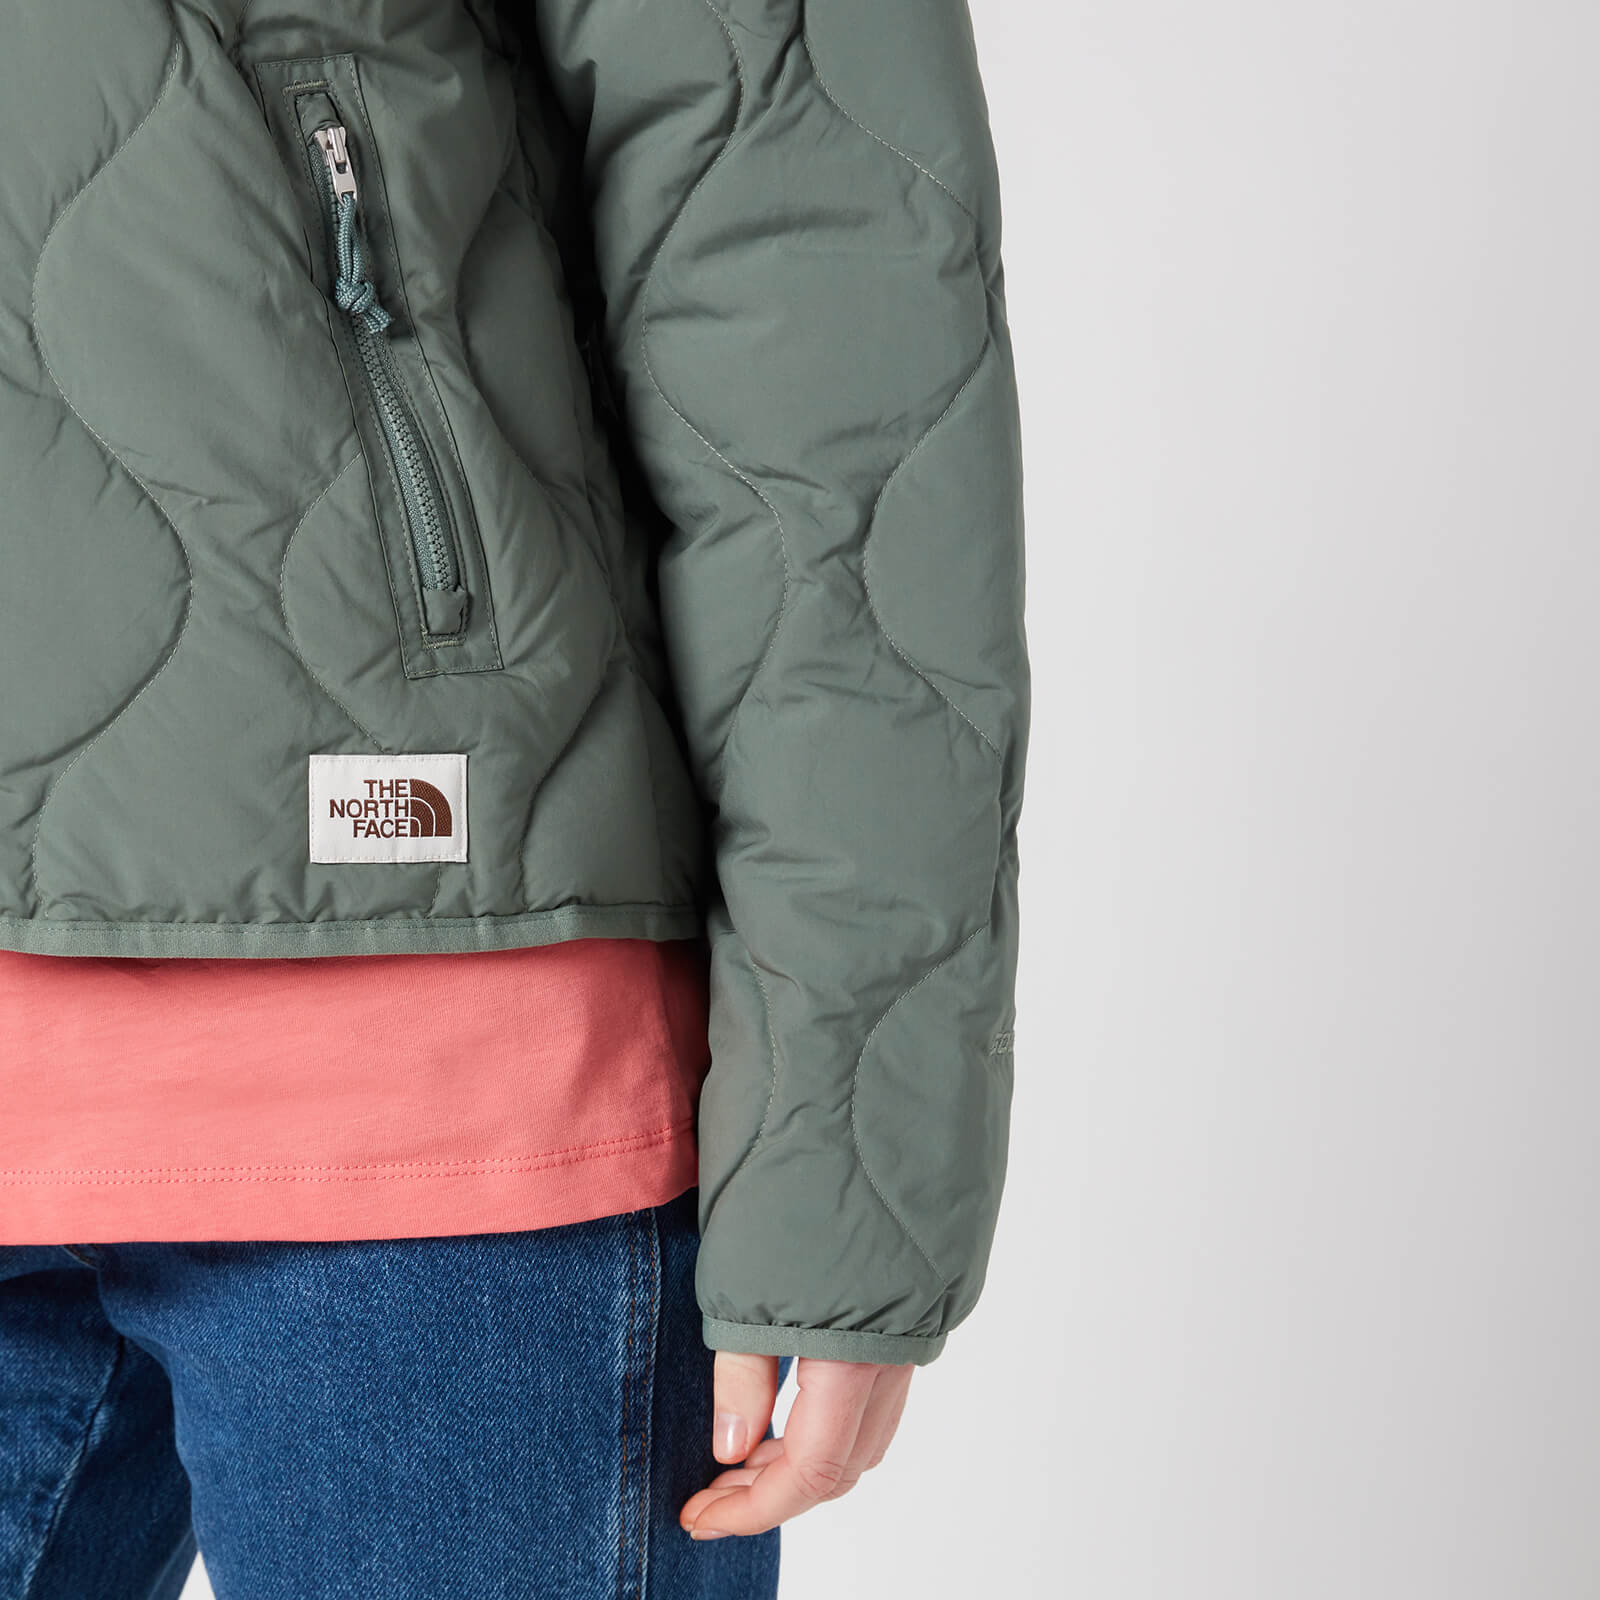 The North Face Women's M66 Down Jacket - Light Green - S Nf0a5a9ov1t1 General Clothing, Green